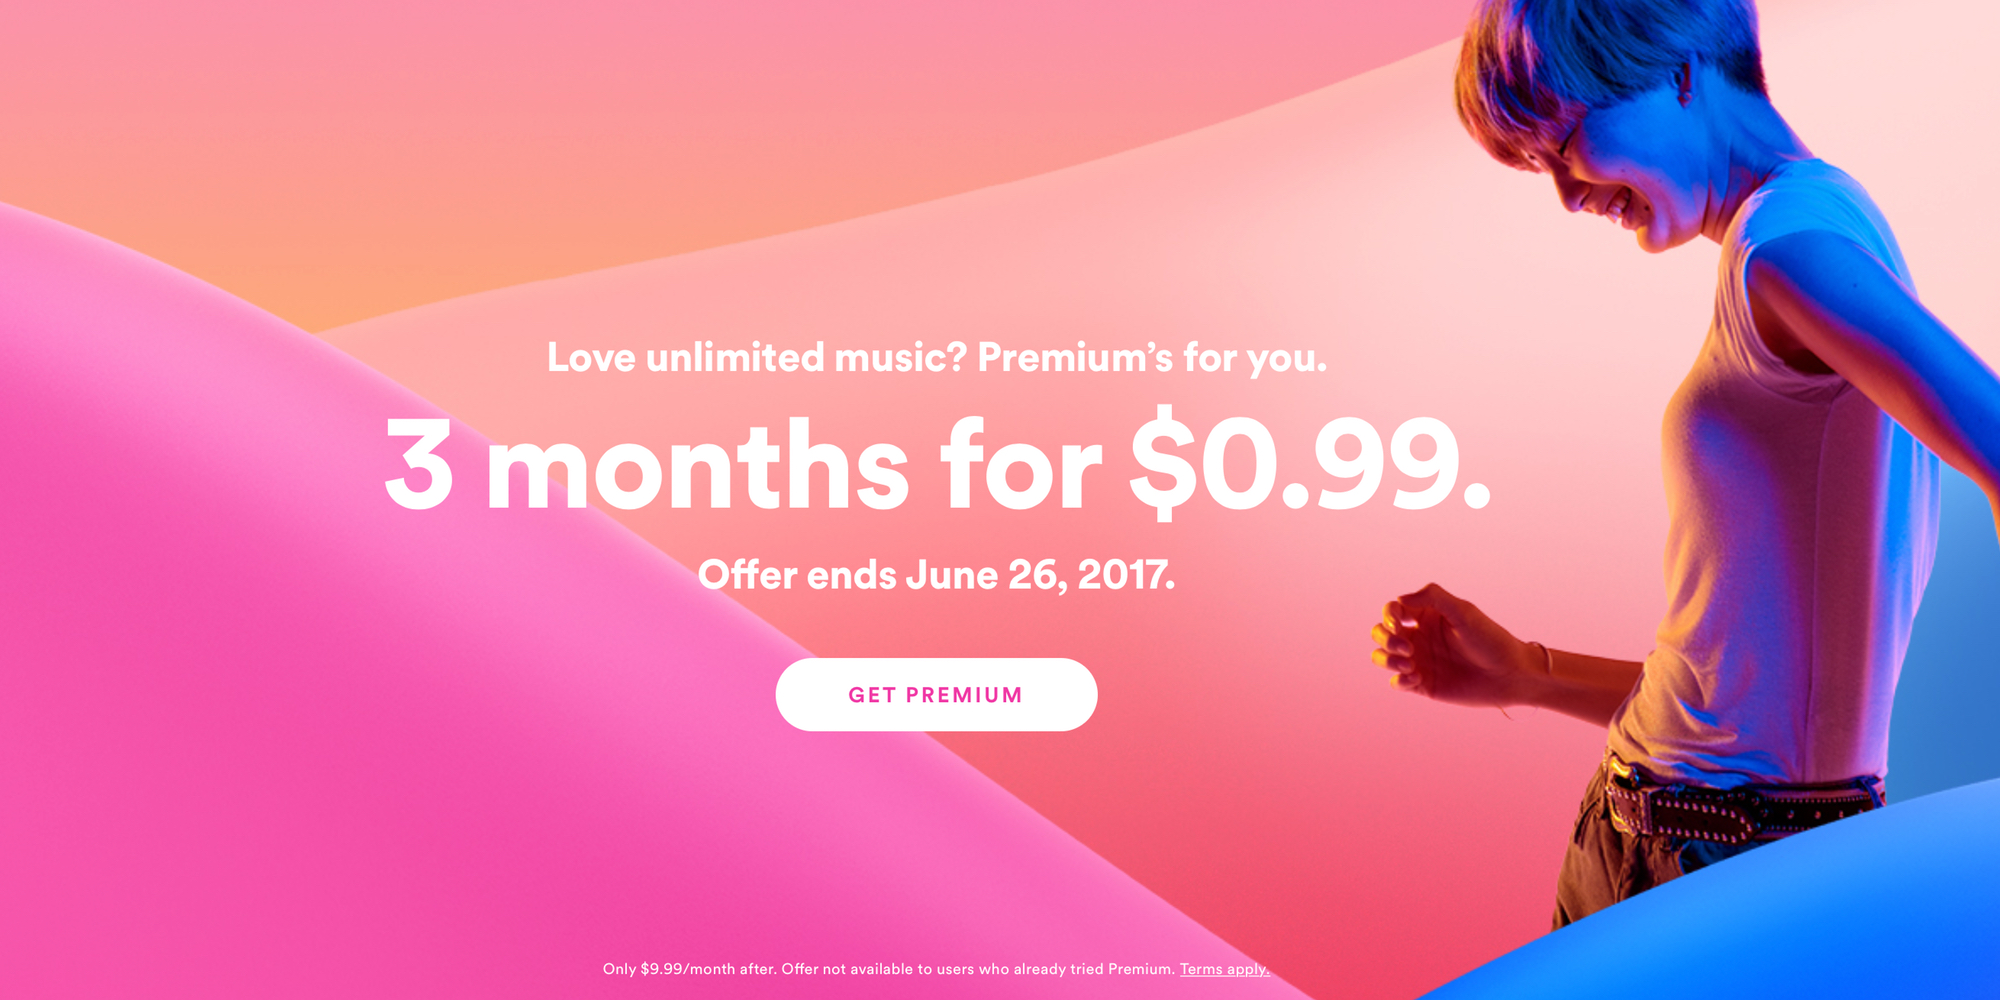 spotify-premium-3-month-trial-gets-you-unlimited-music-for-1-30-value